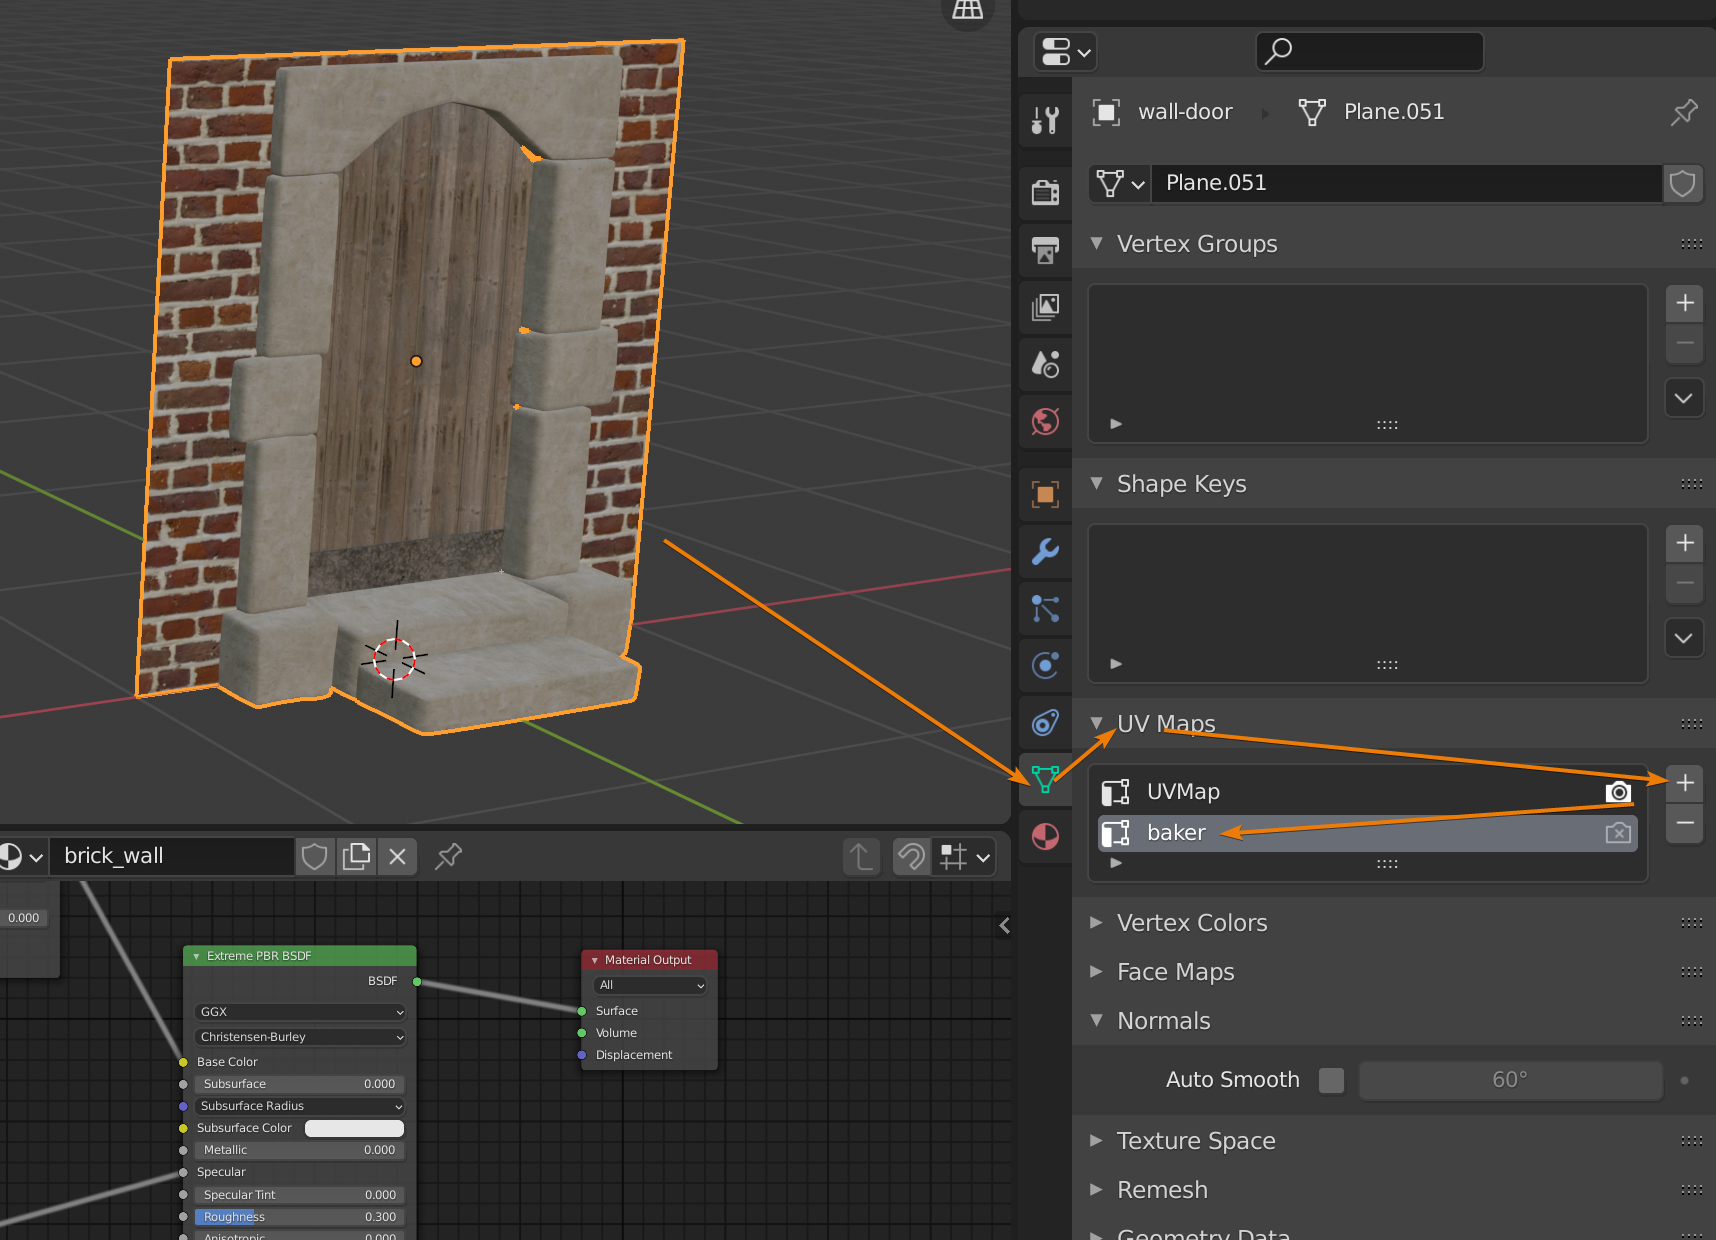 How you can bake textures faster in Blender's Cycles render